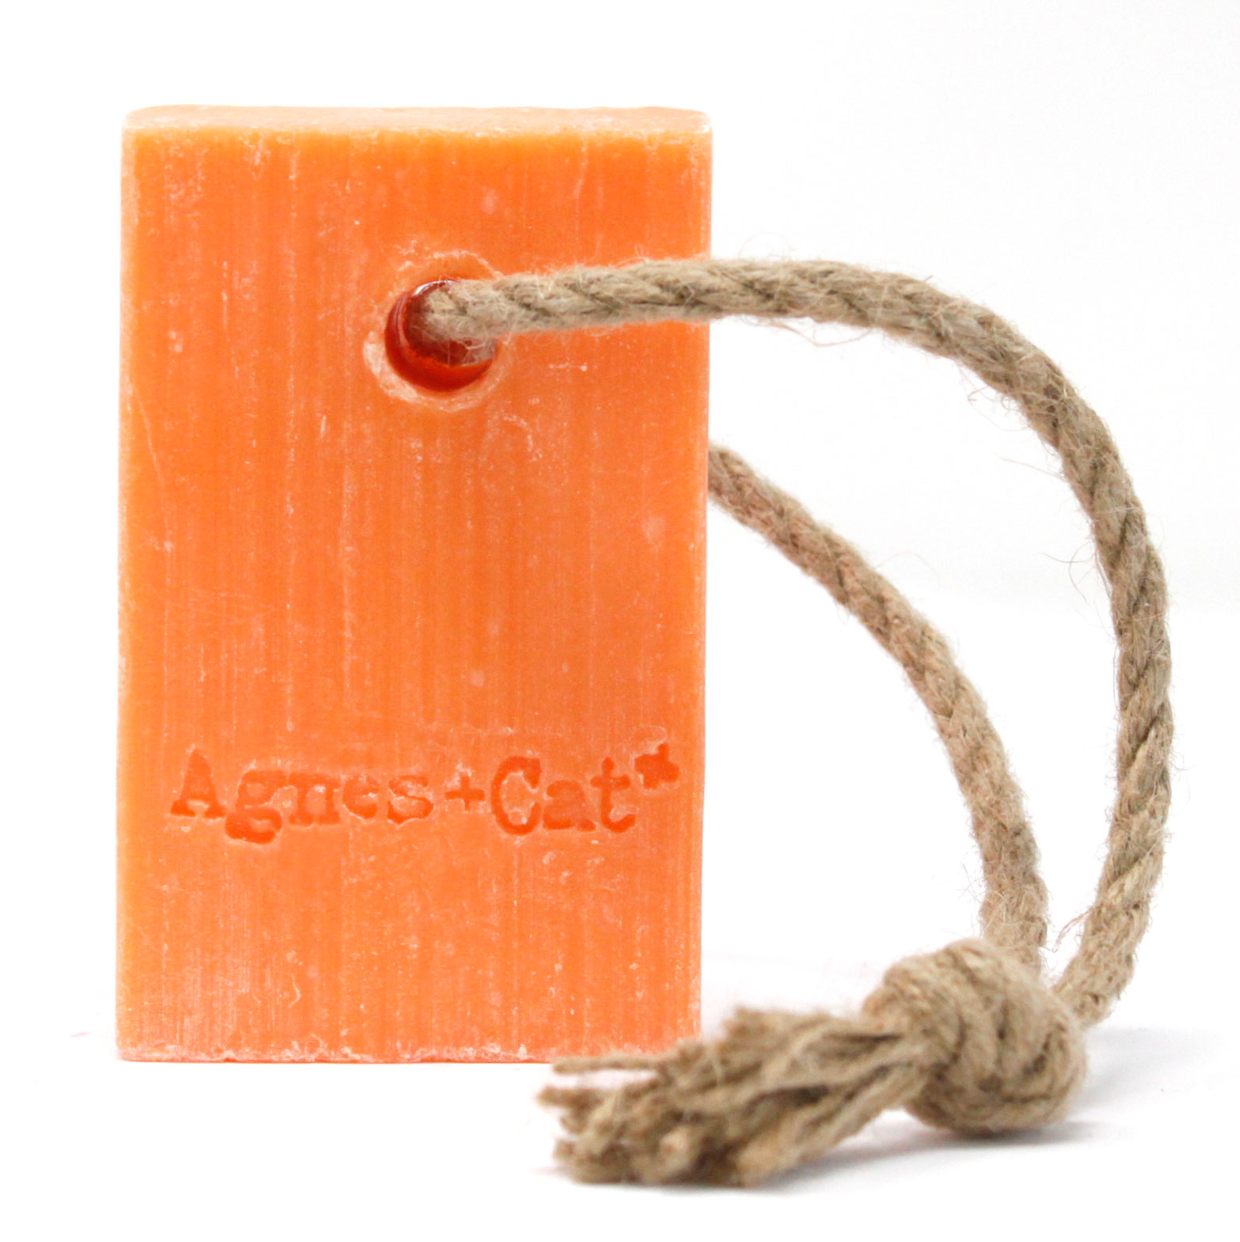 Agnes & Cat Soap on a rope